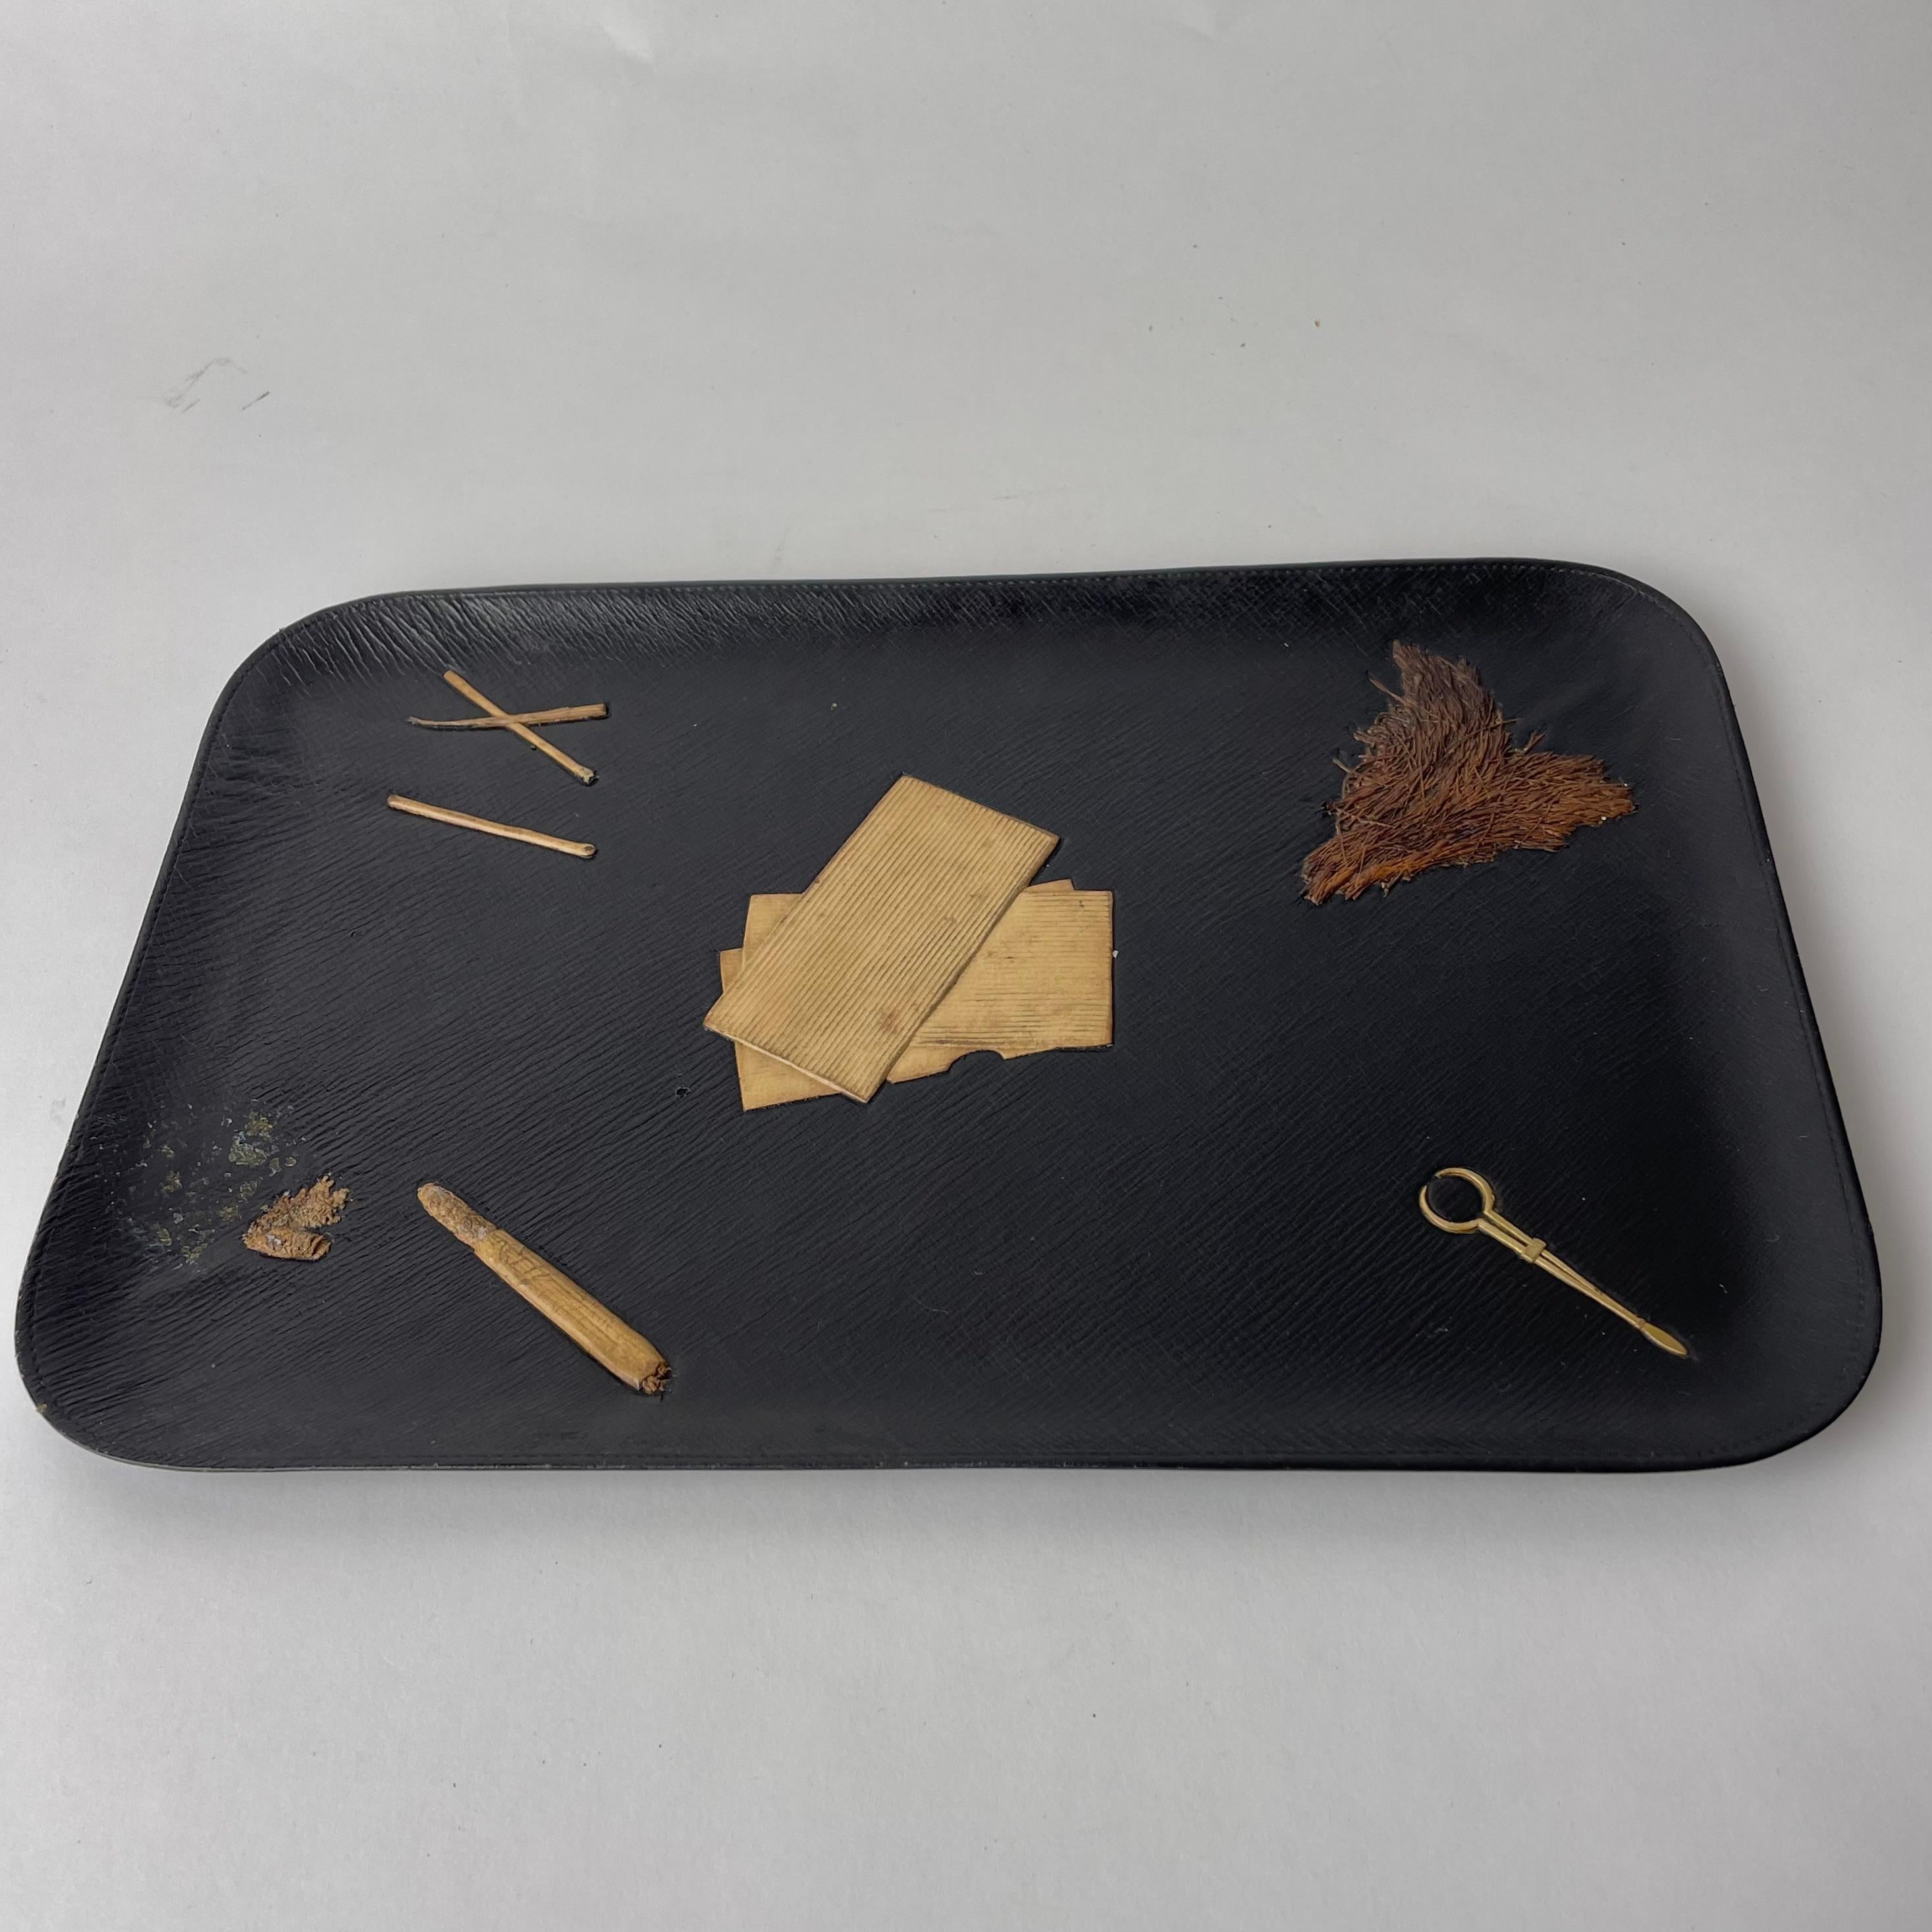 Austrian Leather-covered Desk Dish with Smoking Accessories from the early 20th Century For Sale